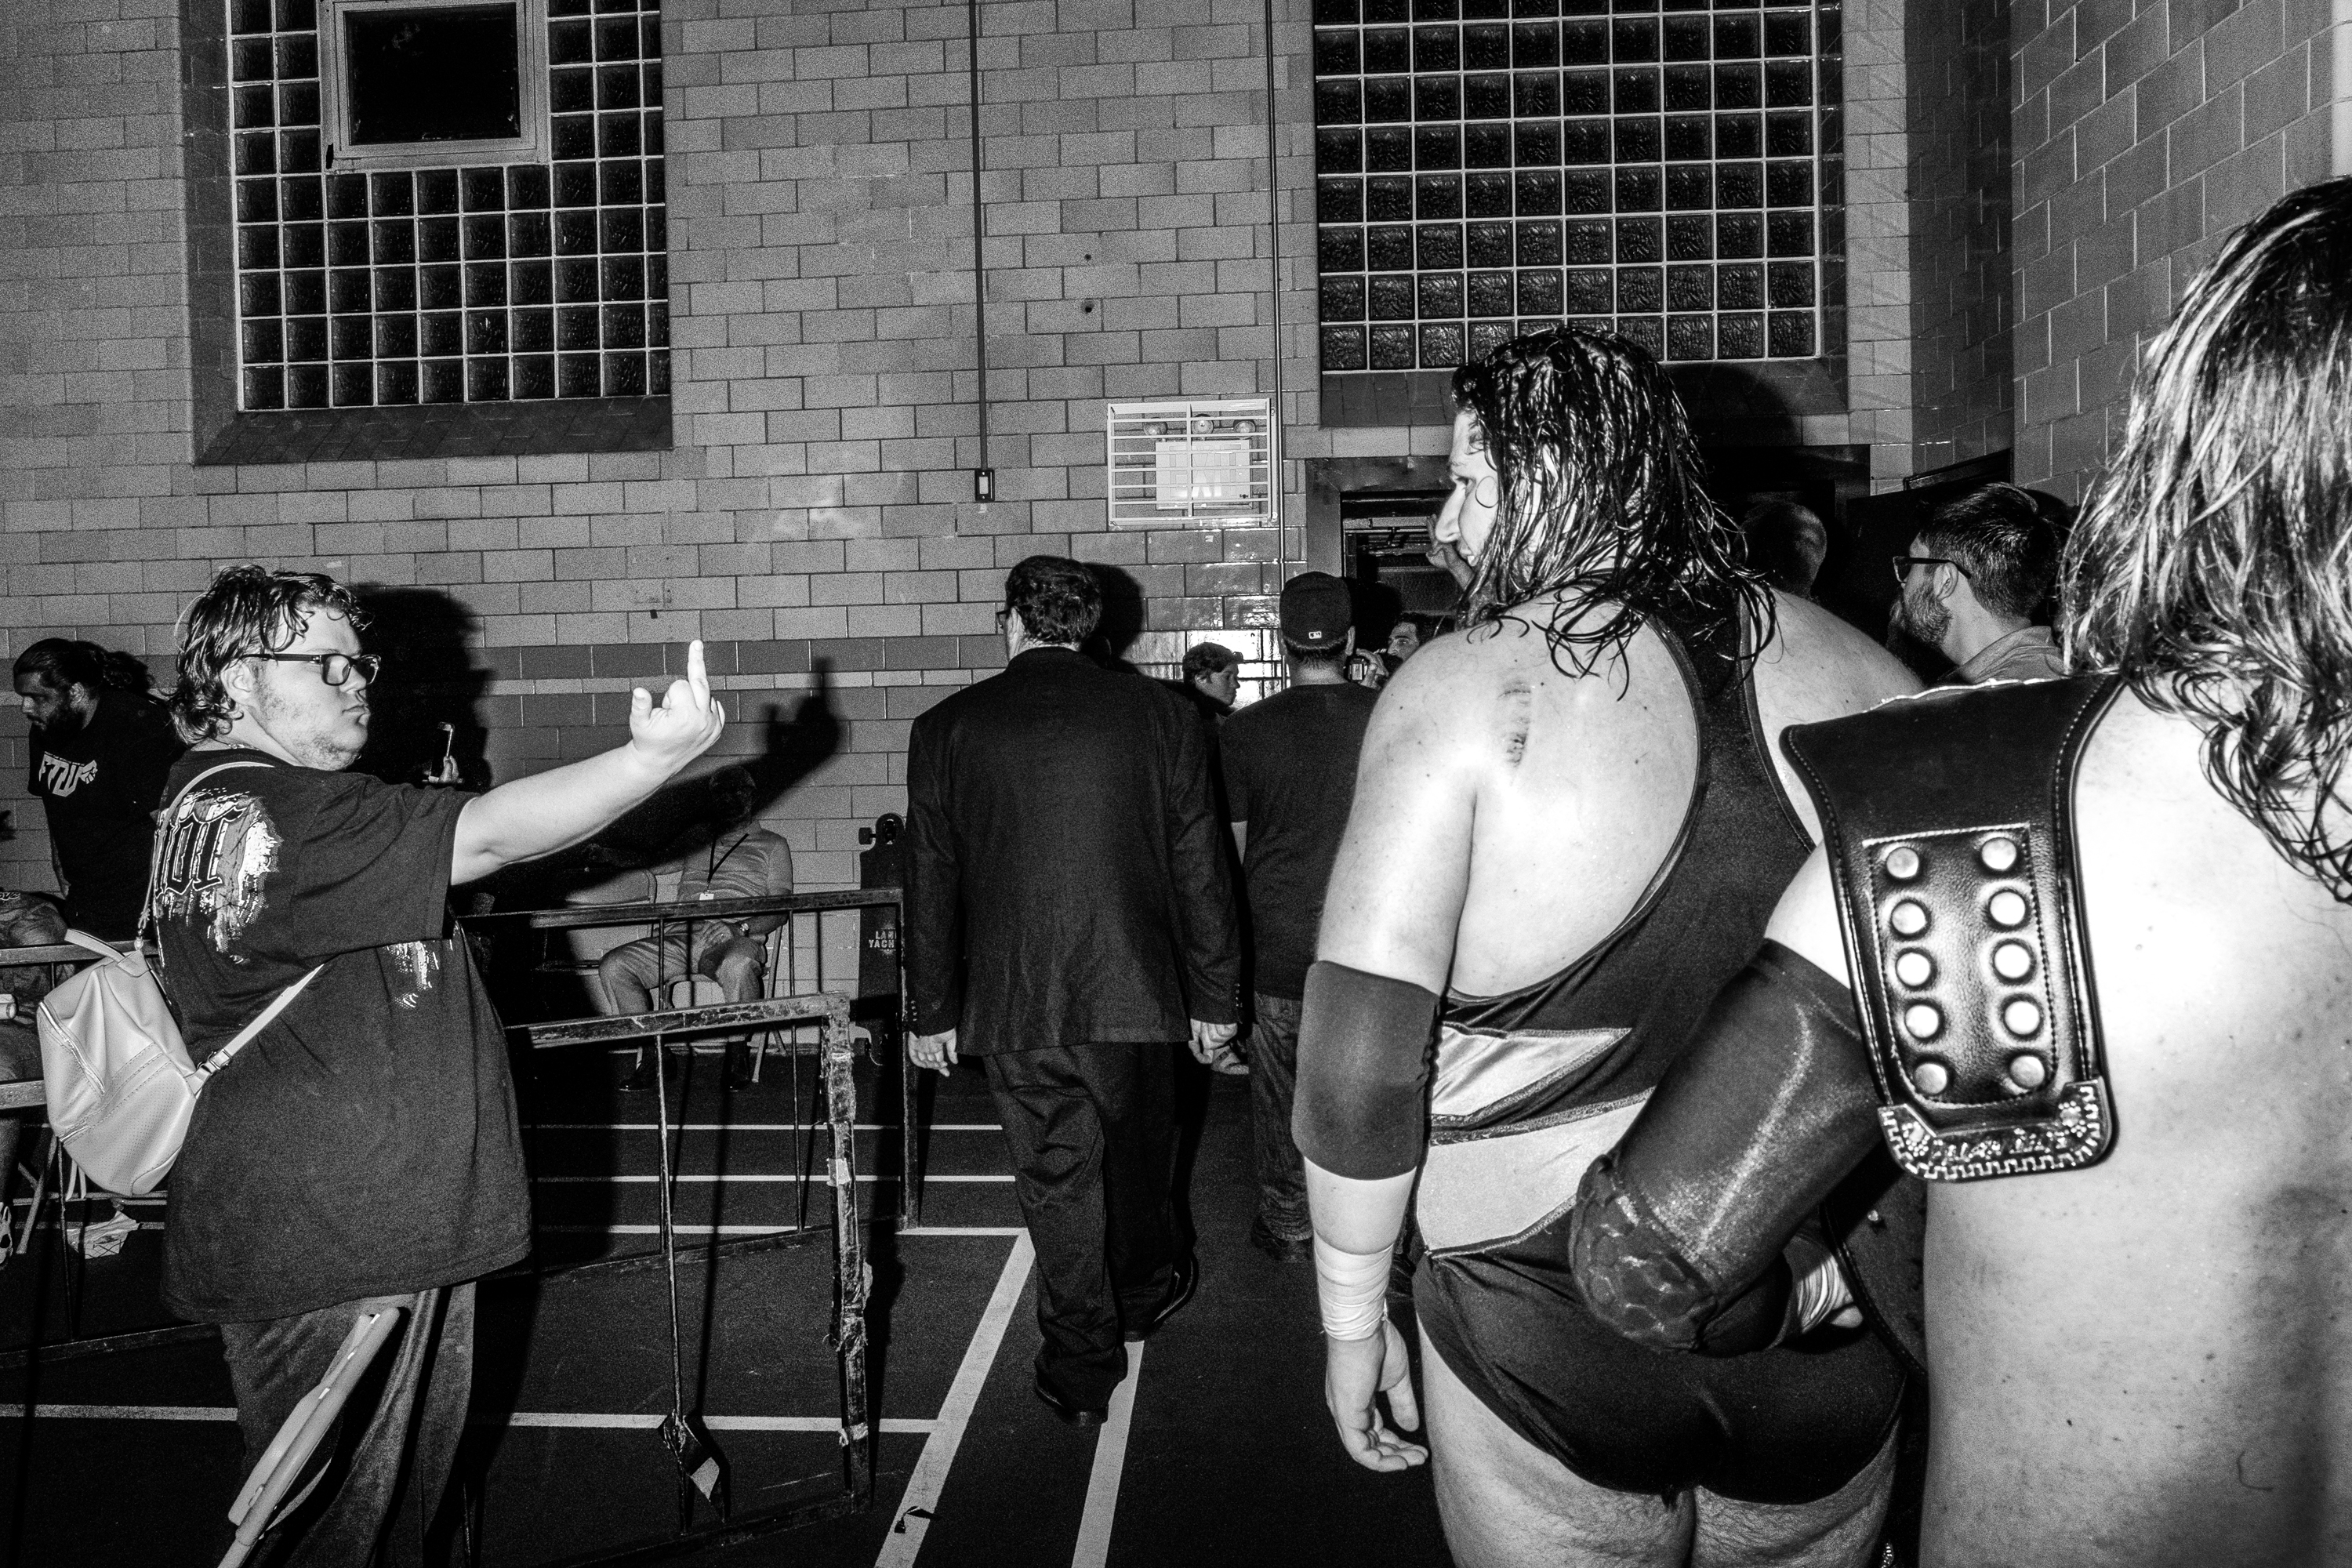 The Most Precious Blood Church 
2739 Harway Ave
Brooklyn, New York, United States
One of the fans flipping off one of the wrestlers.